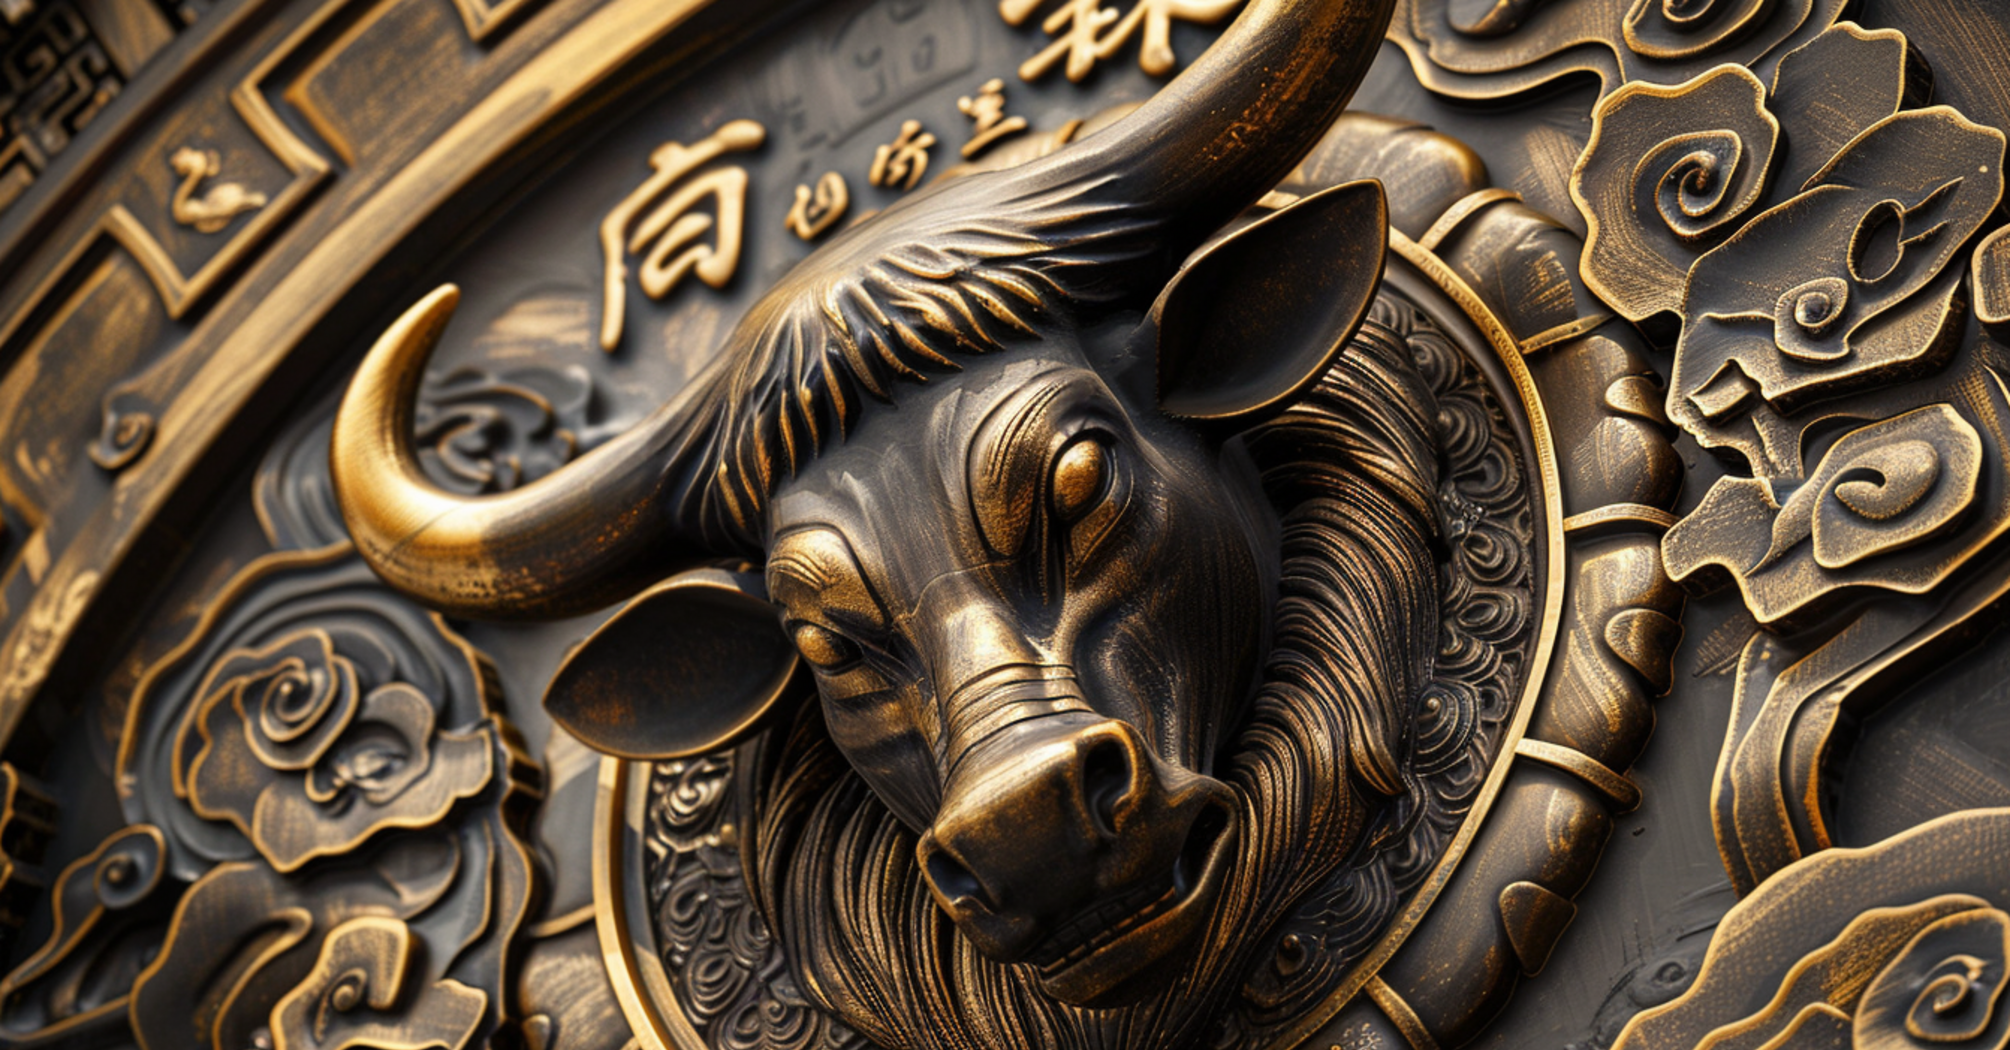 Great time to focus on work: Chinese horoscope for March 18